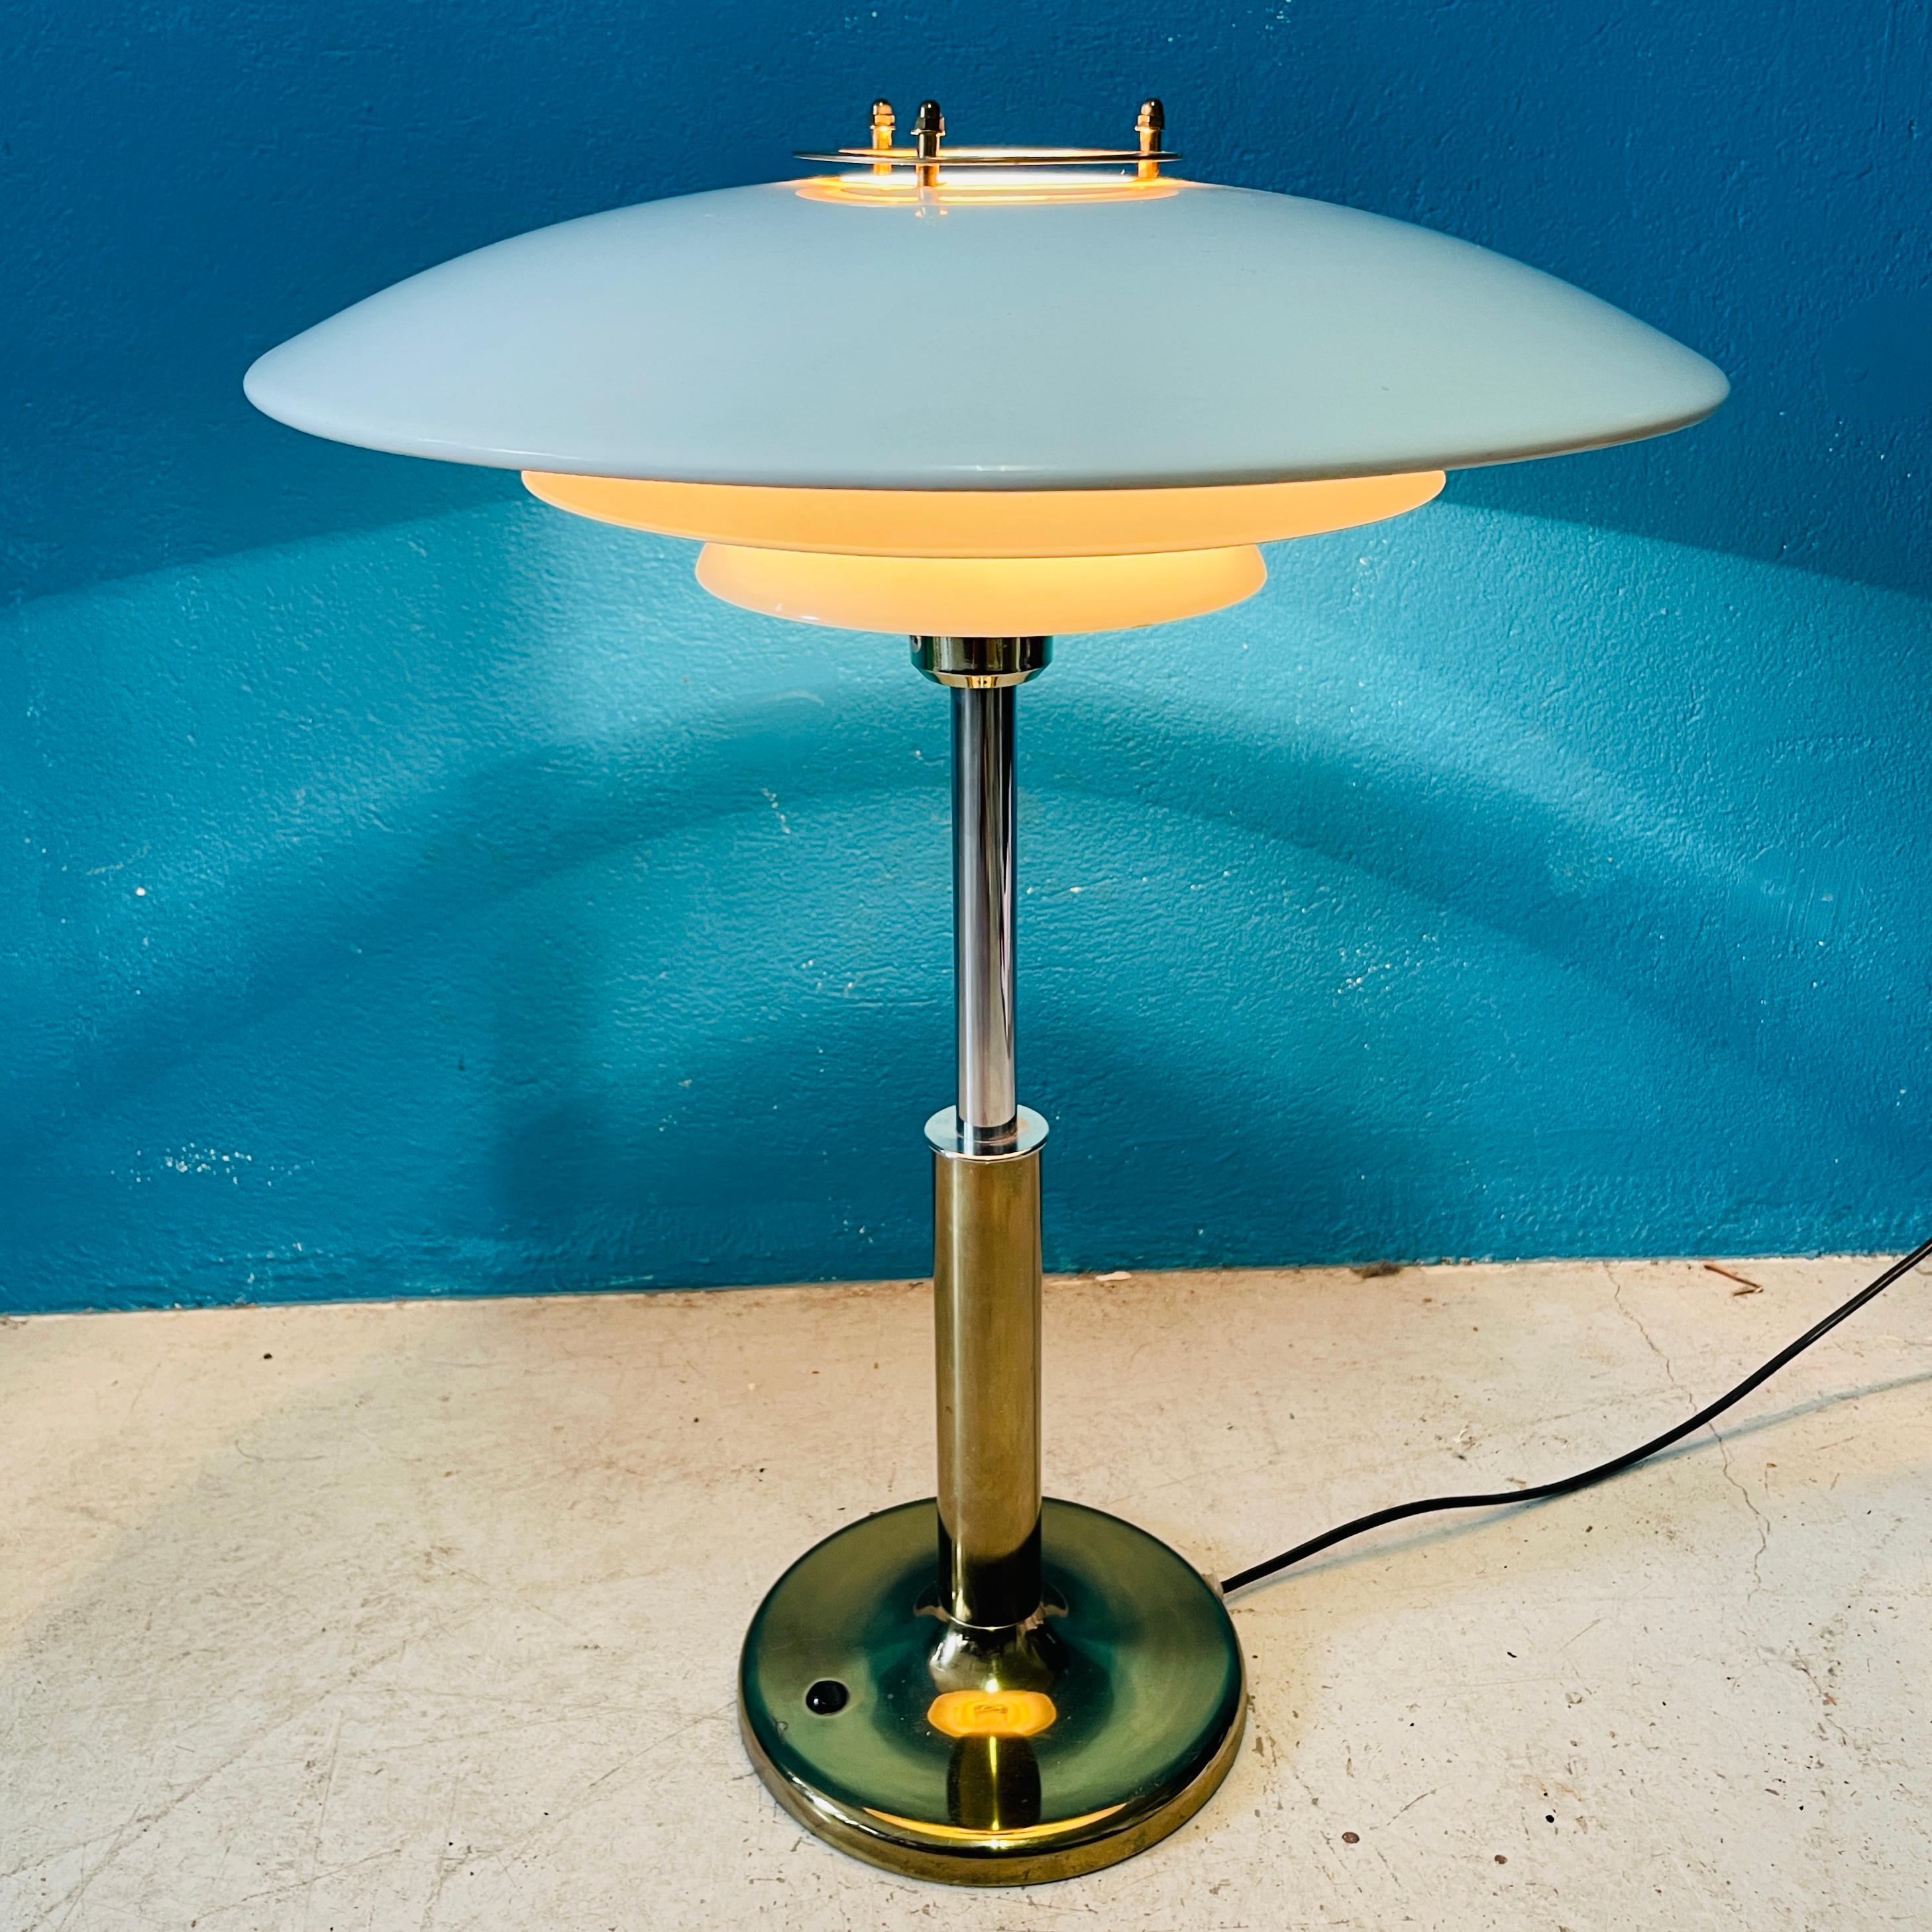 Beautiful Table Lamp From 1980's. Manufactured in Finland but Designer is unknown. 

Stylish Colors & Materials: Base and lower part of arm is made of brass. Upper part of arm is made of chrome plated steel. 
Shade Part is white-painted metal with